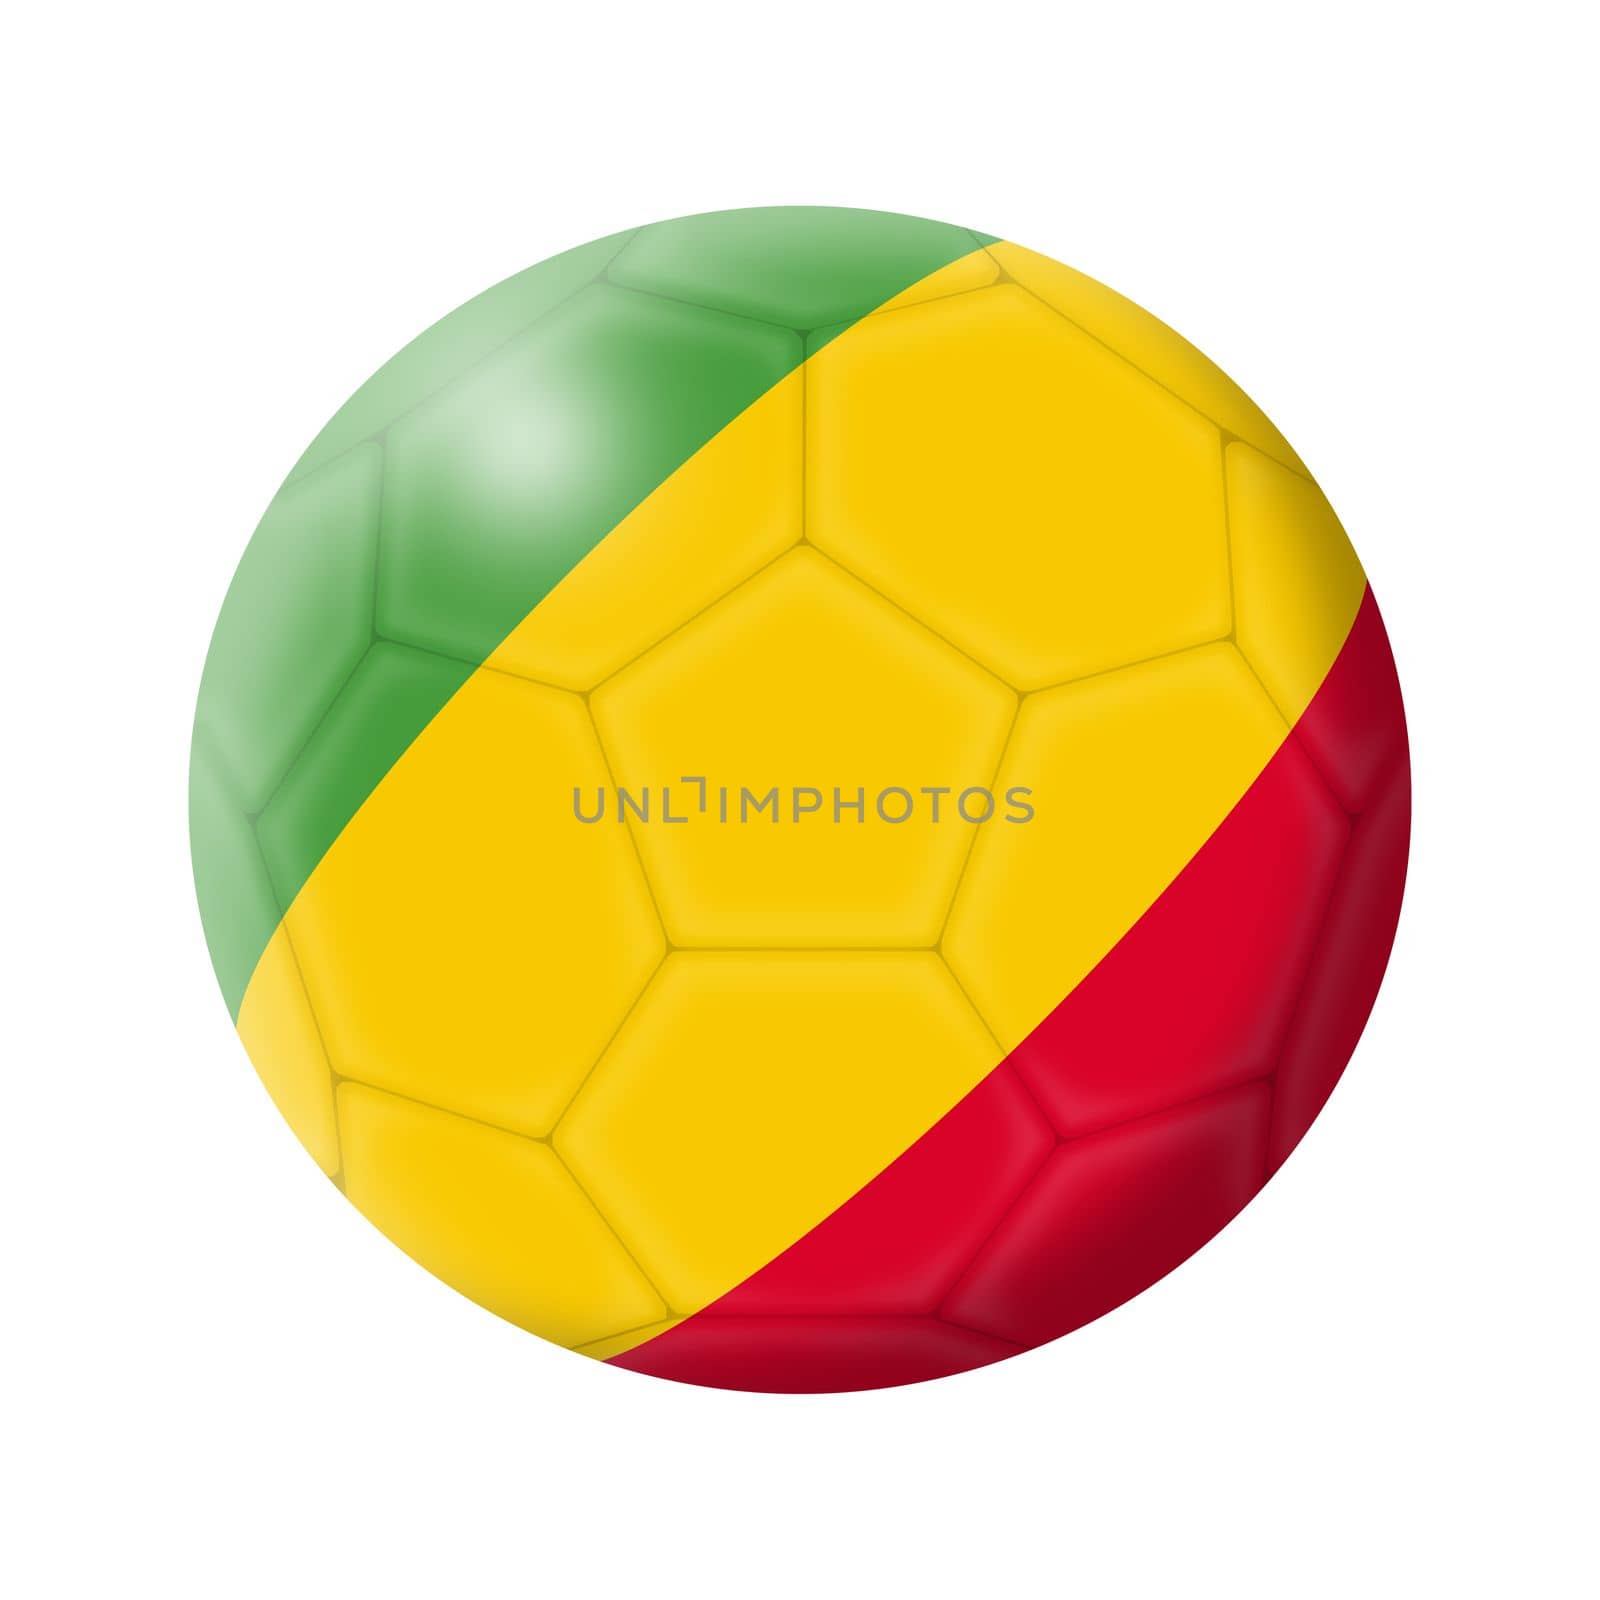 A Congo soccer ball football 3d illustration isolated on white with clipping path